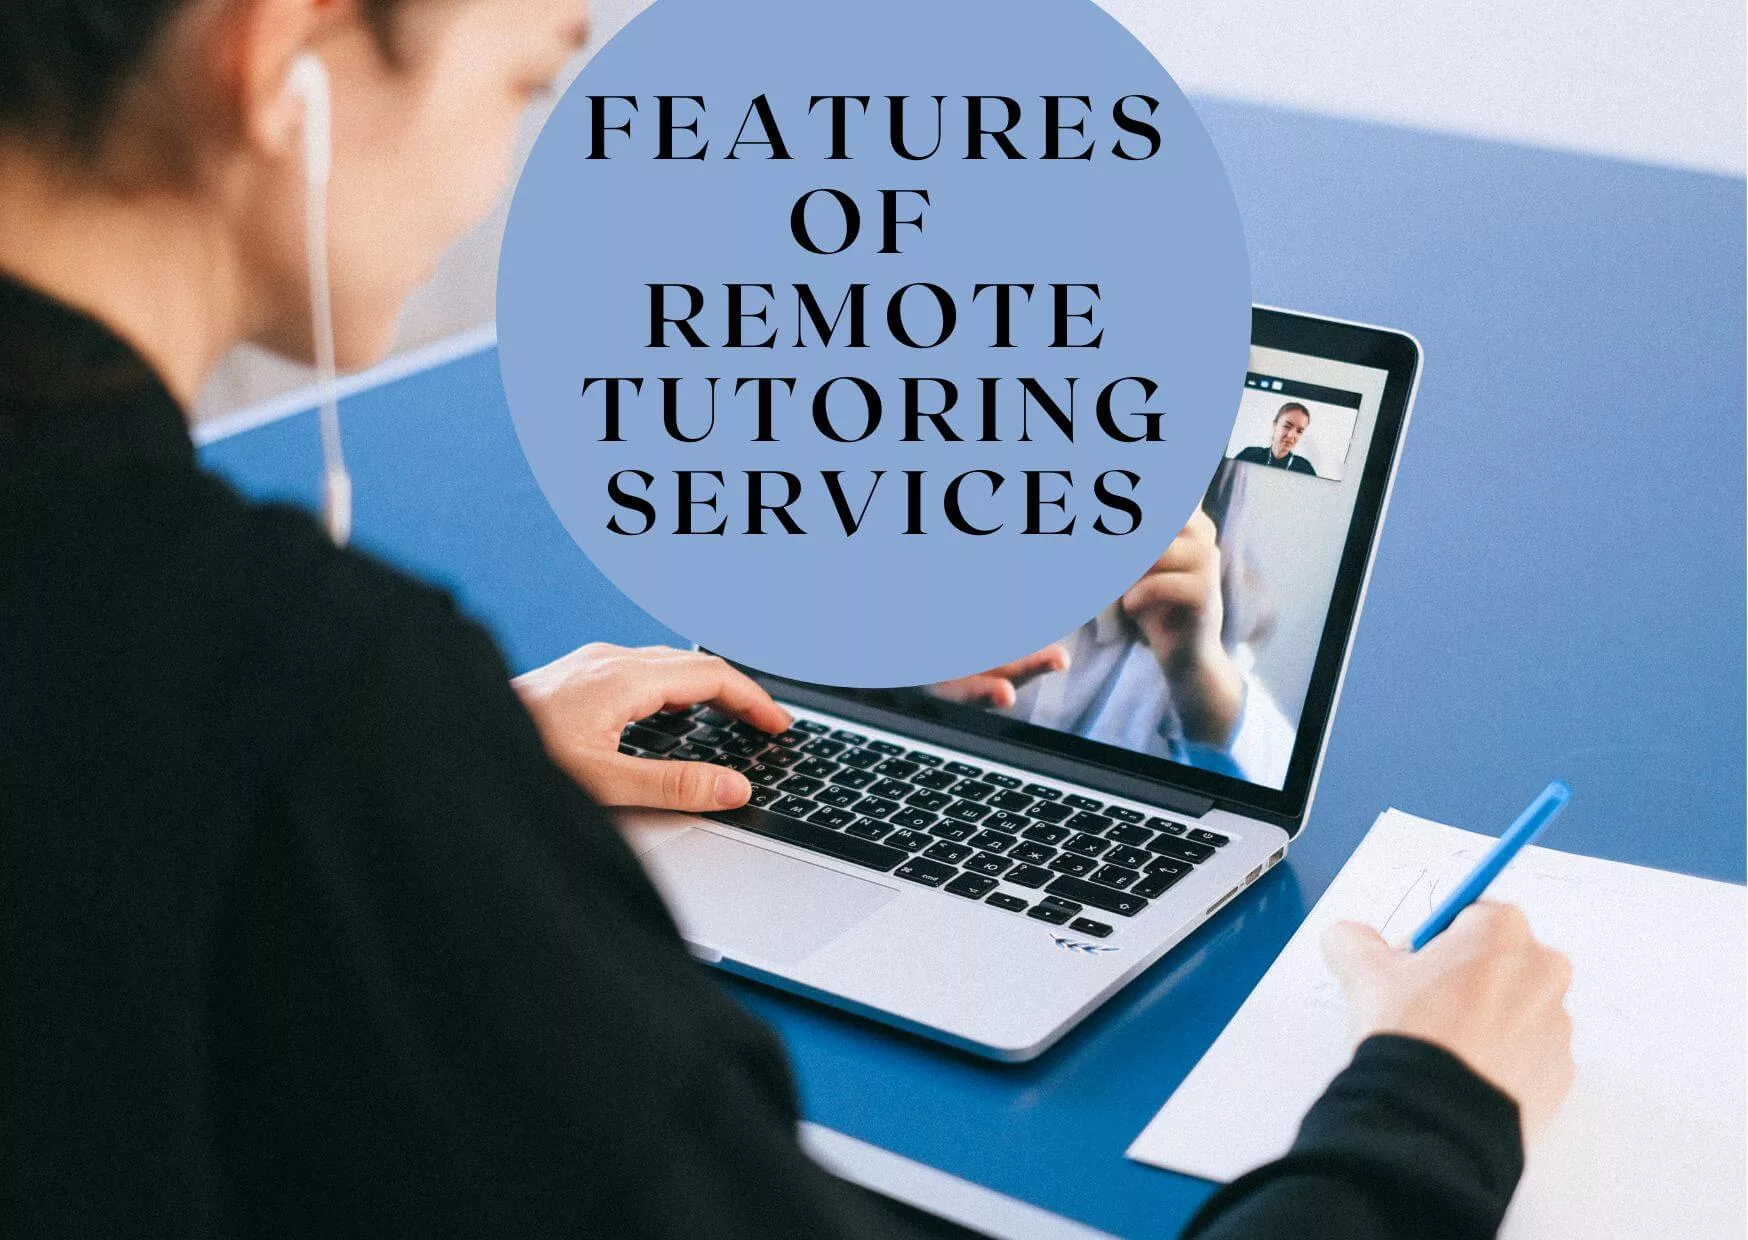 Features of Remote Tutoring Services